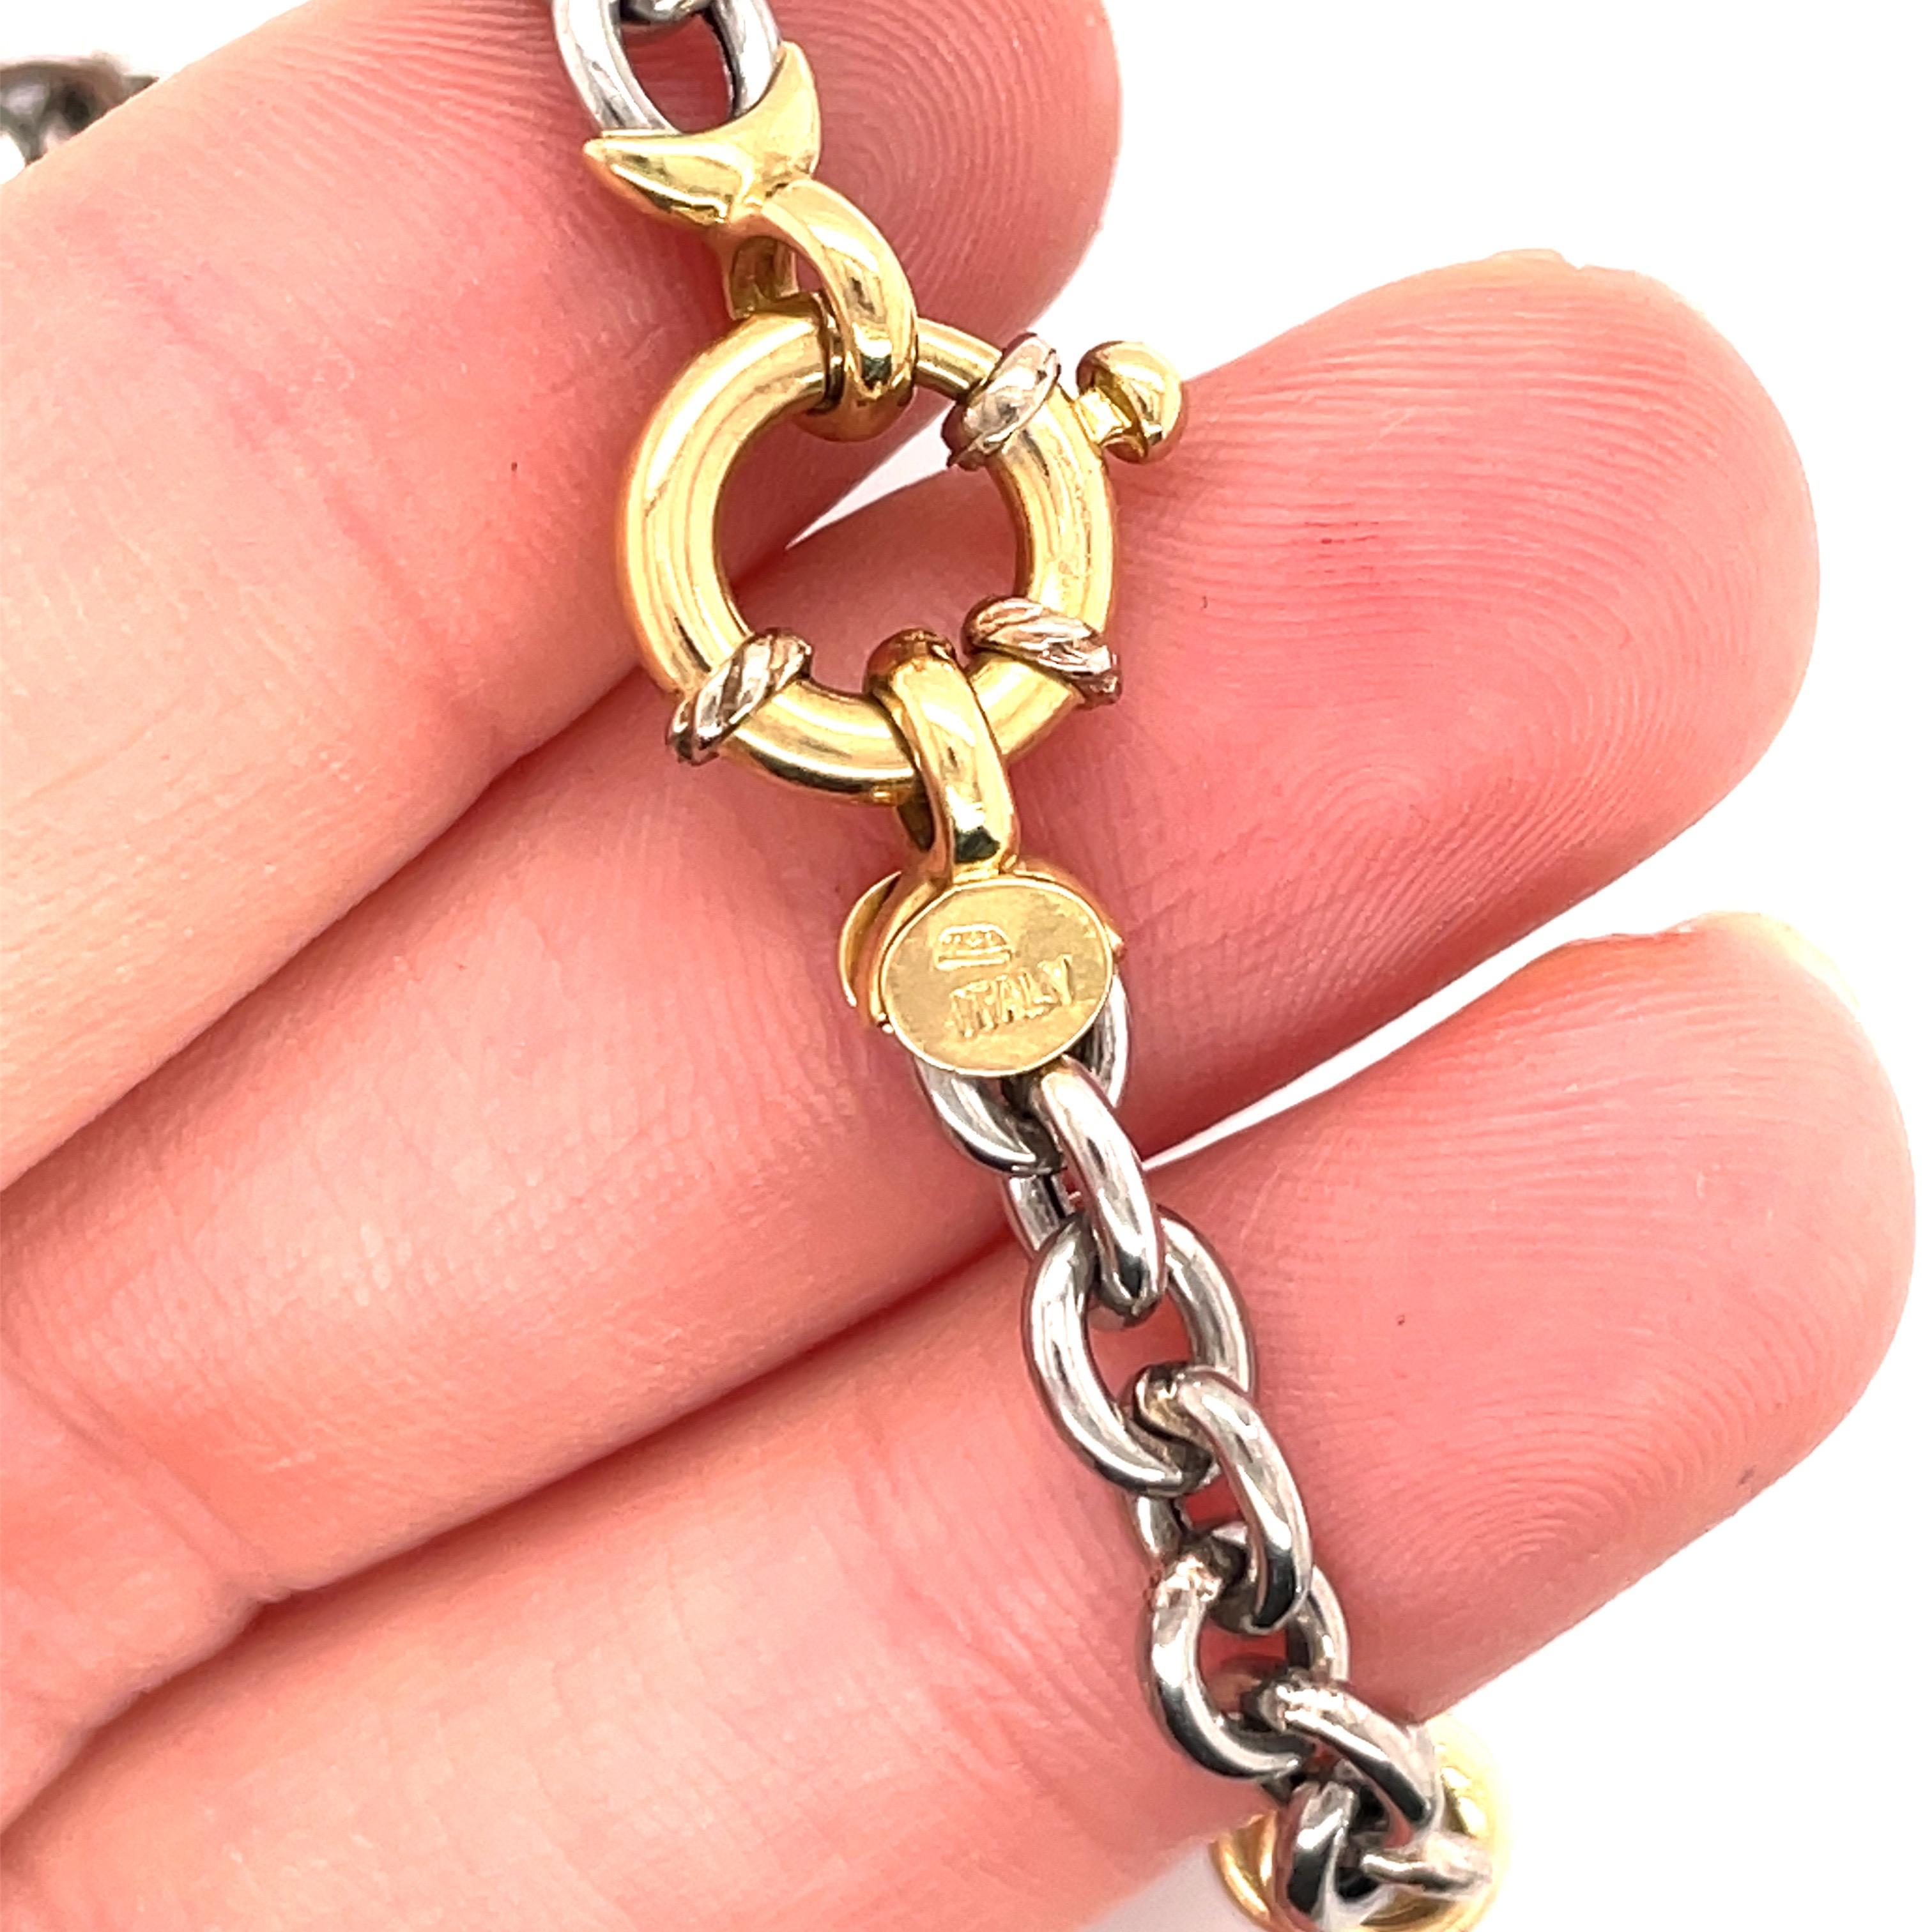 Contemporary Platinum 18 Karat Yellow Gold Link Bracelet 10.8 Grams Made in Italy For Sale